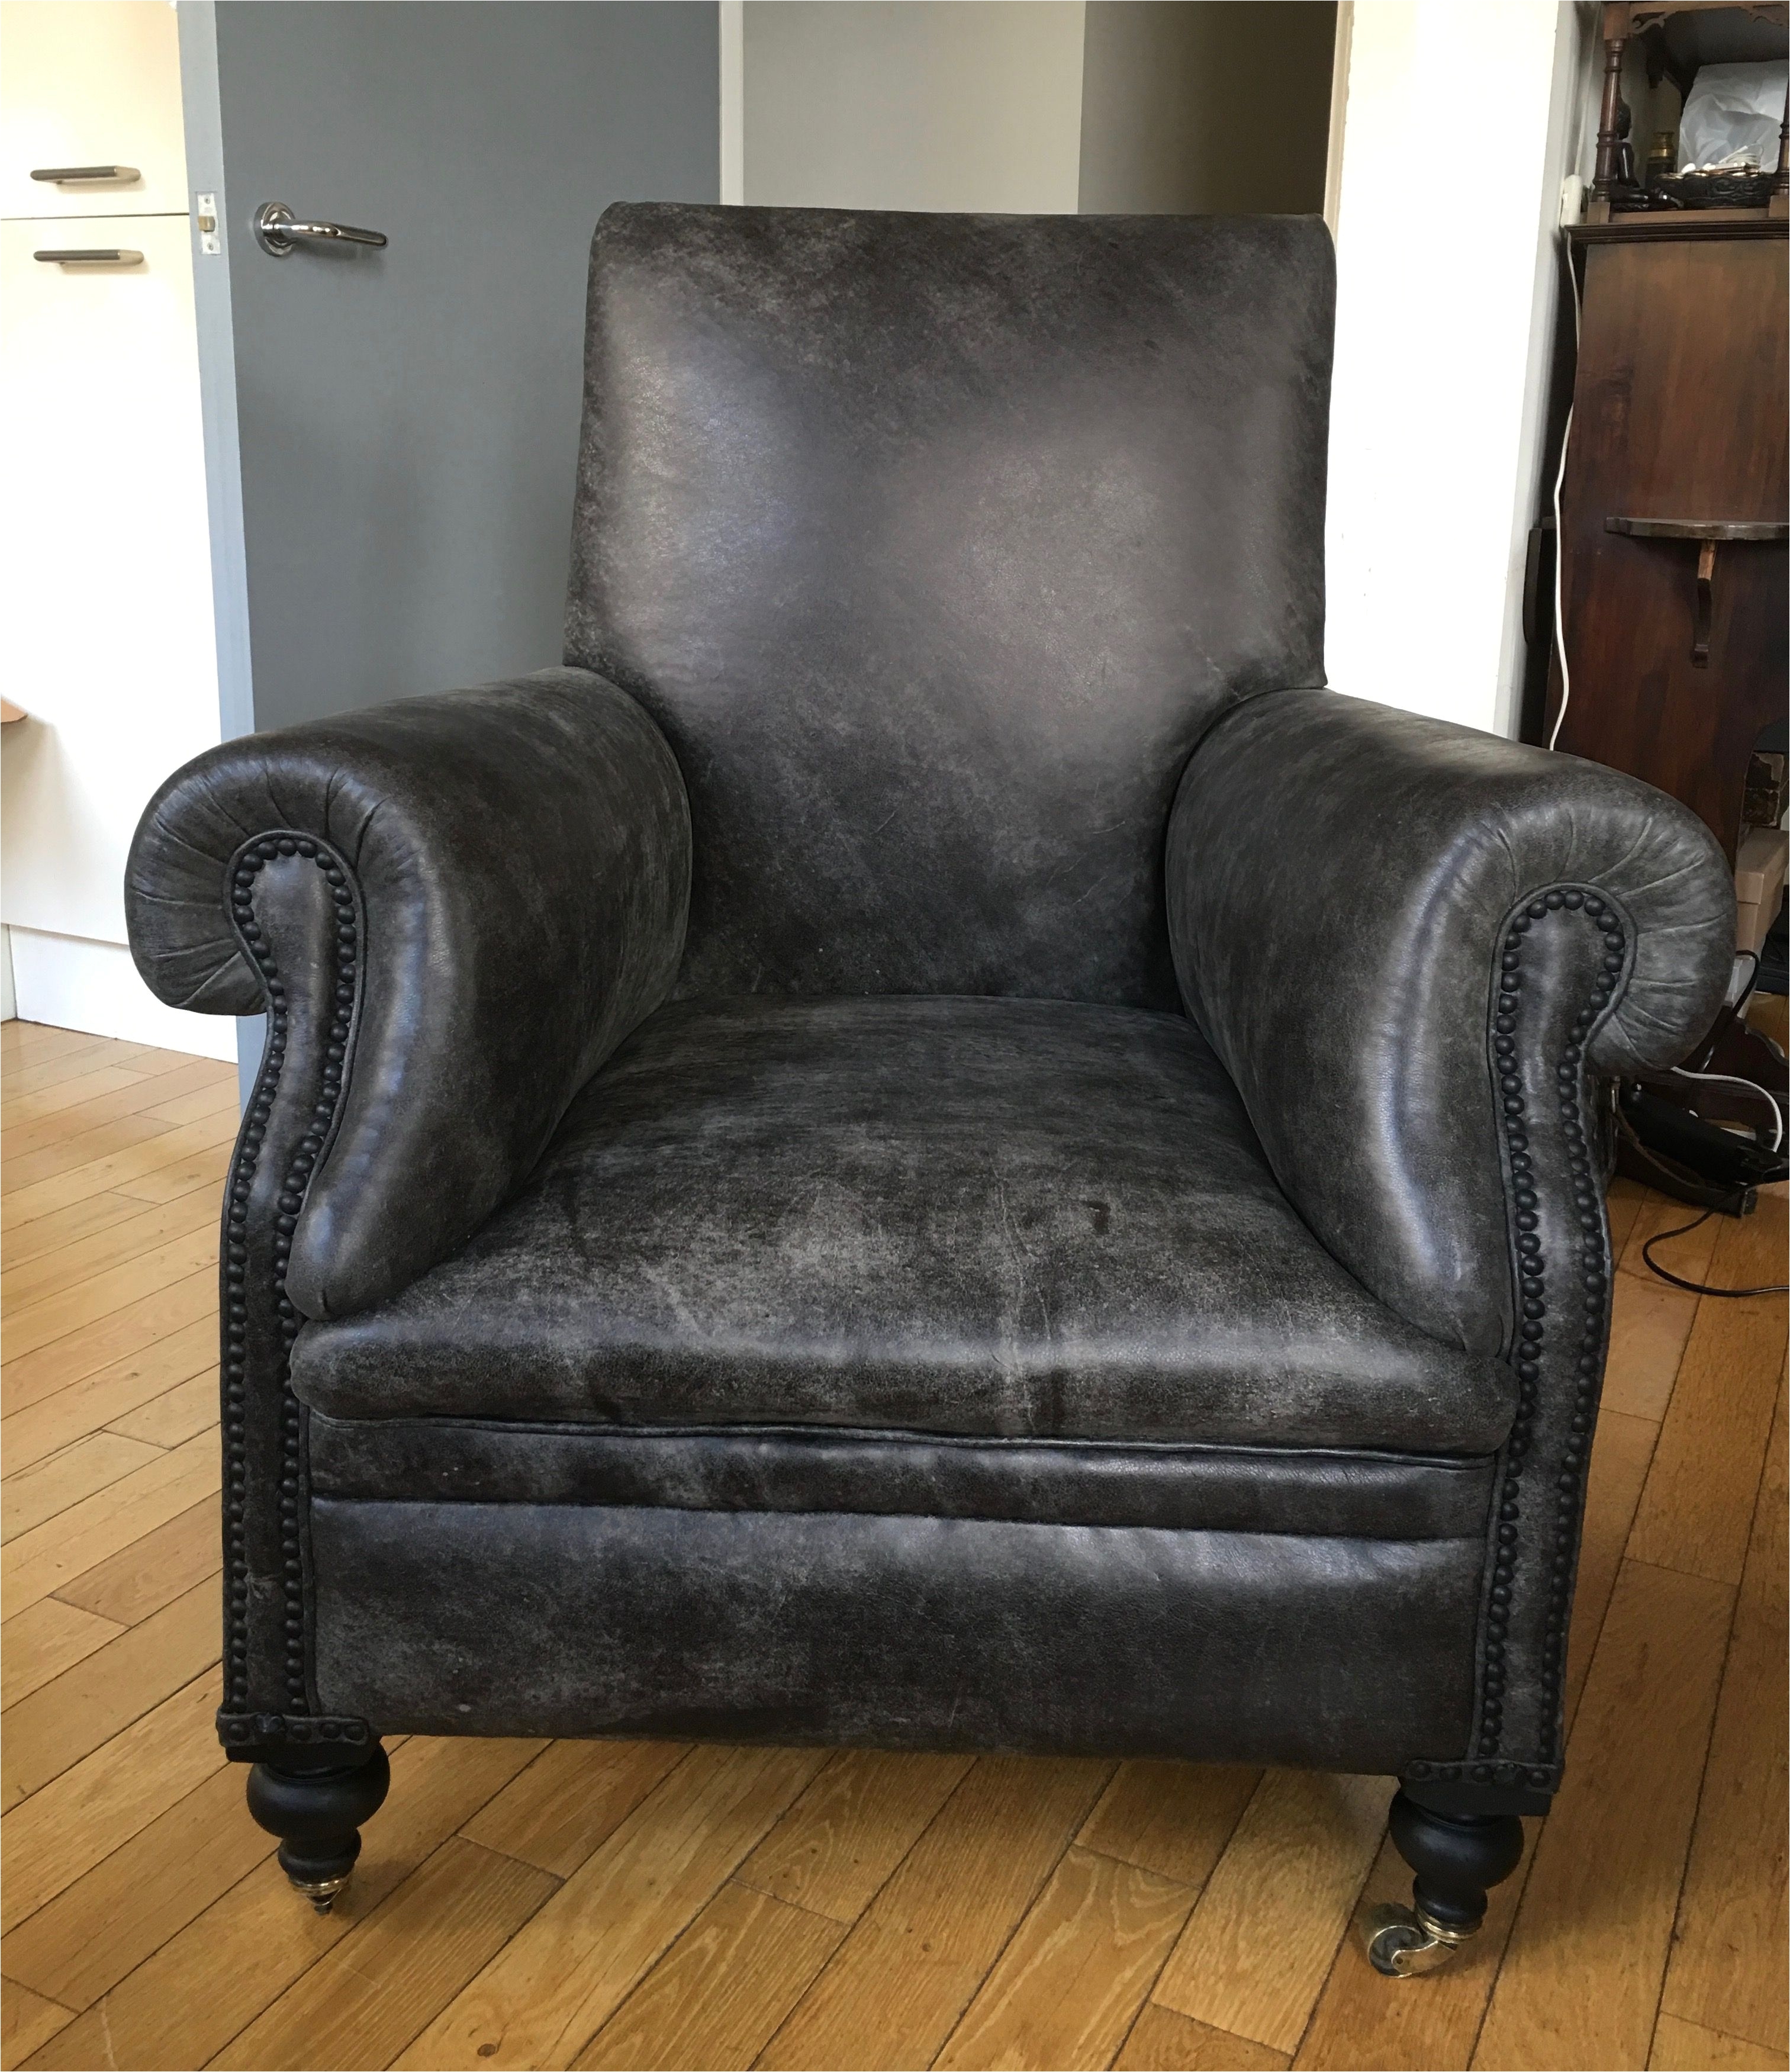 Overstuffed Chair Slipcover Beautiful Customized Leather Armchair Upholstered In Distressed